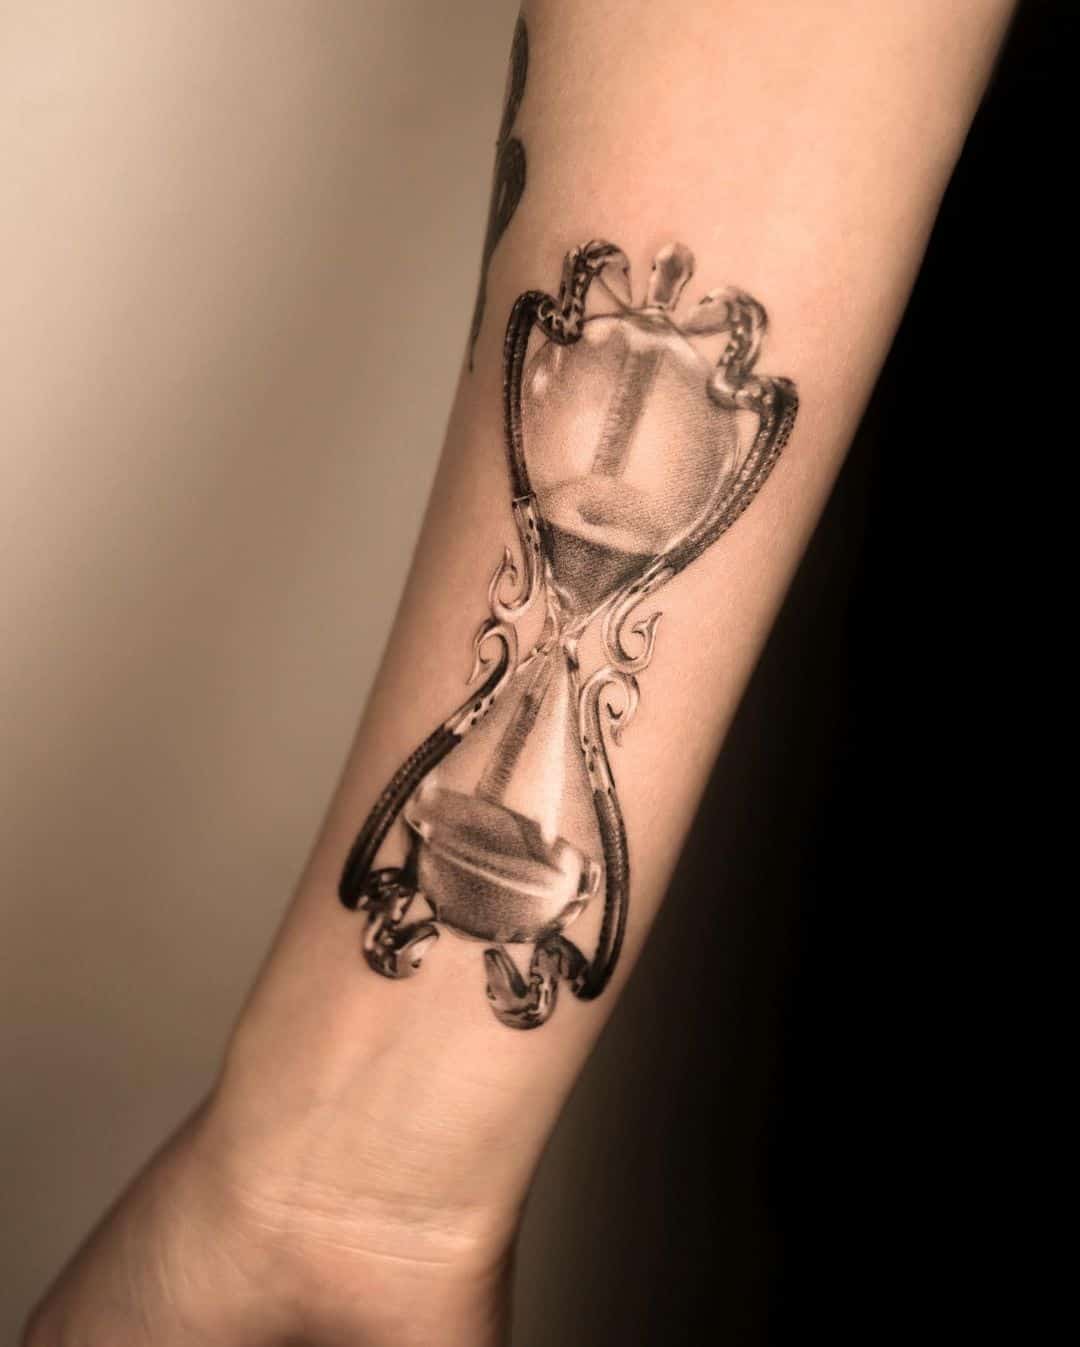 Hourglass Tattoo: Symbolism, Meaning, and Awesome Design Ideas - Saved Tattoo